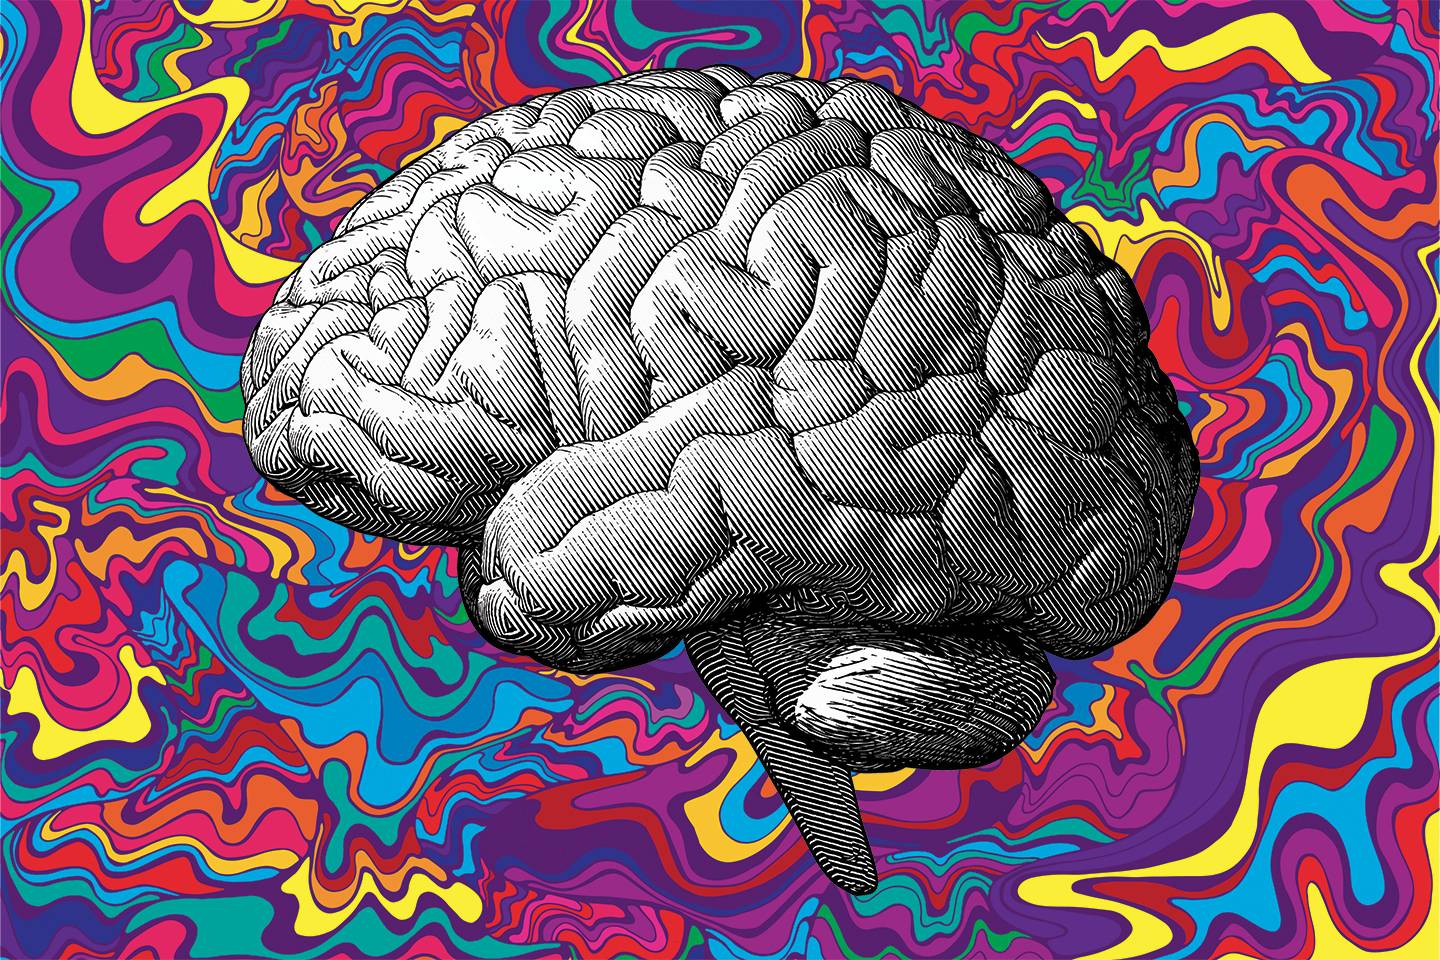 Here’s What Neuroimaging Can Tell Us About the Psychedelic Experience